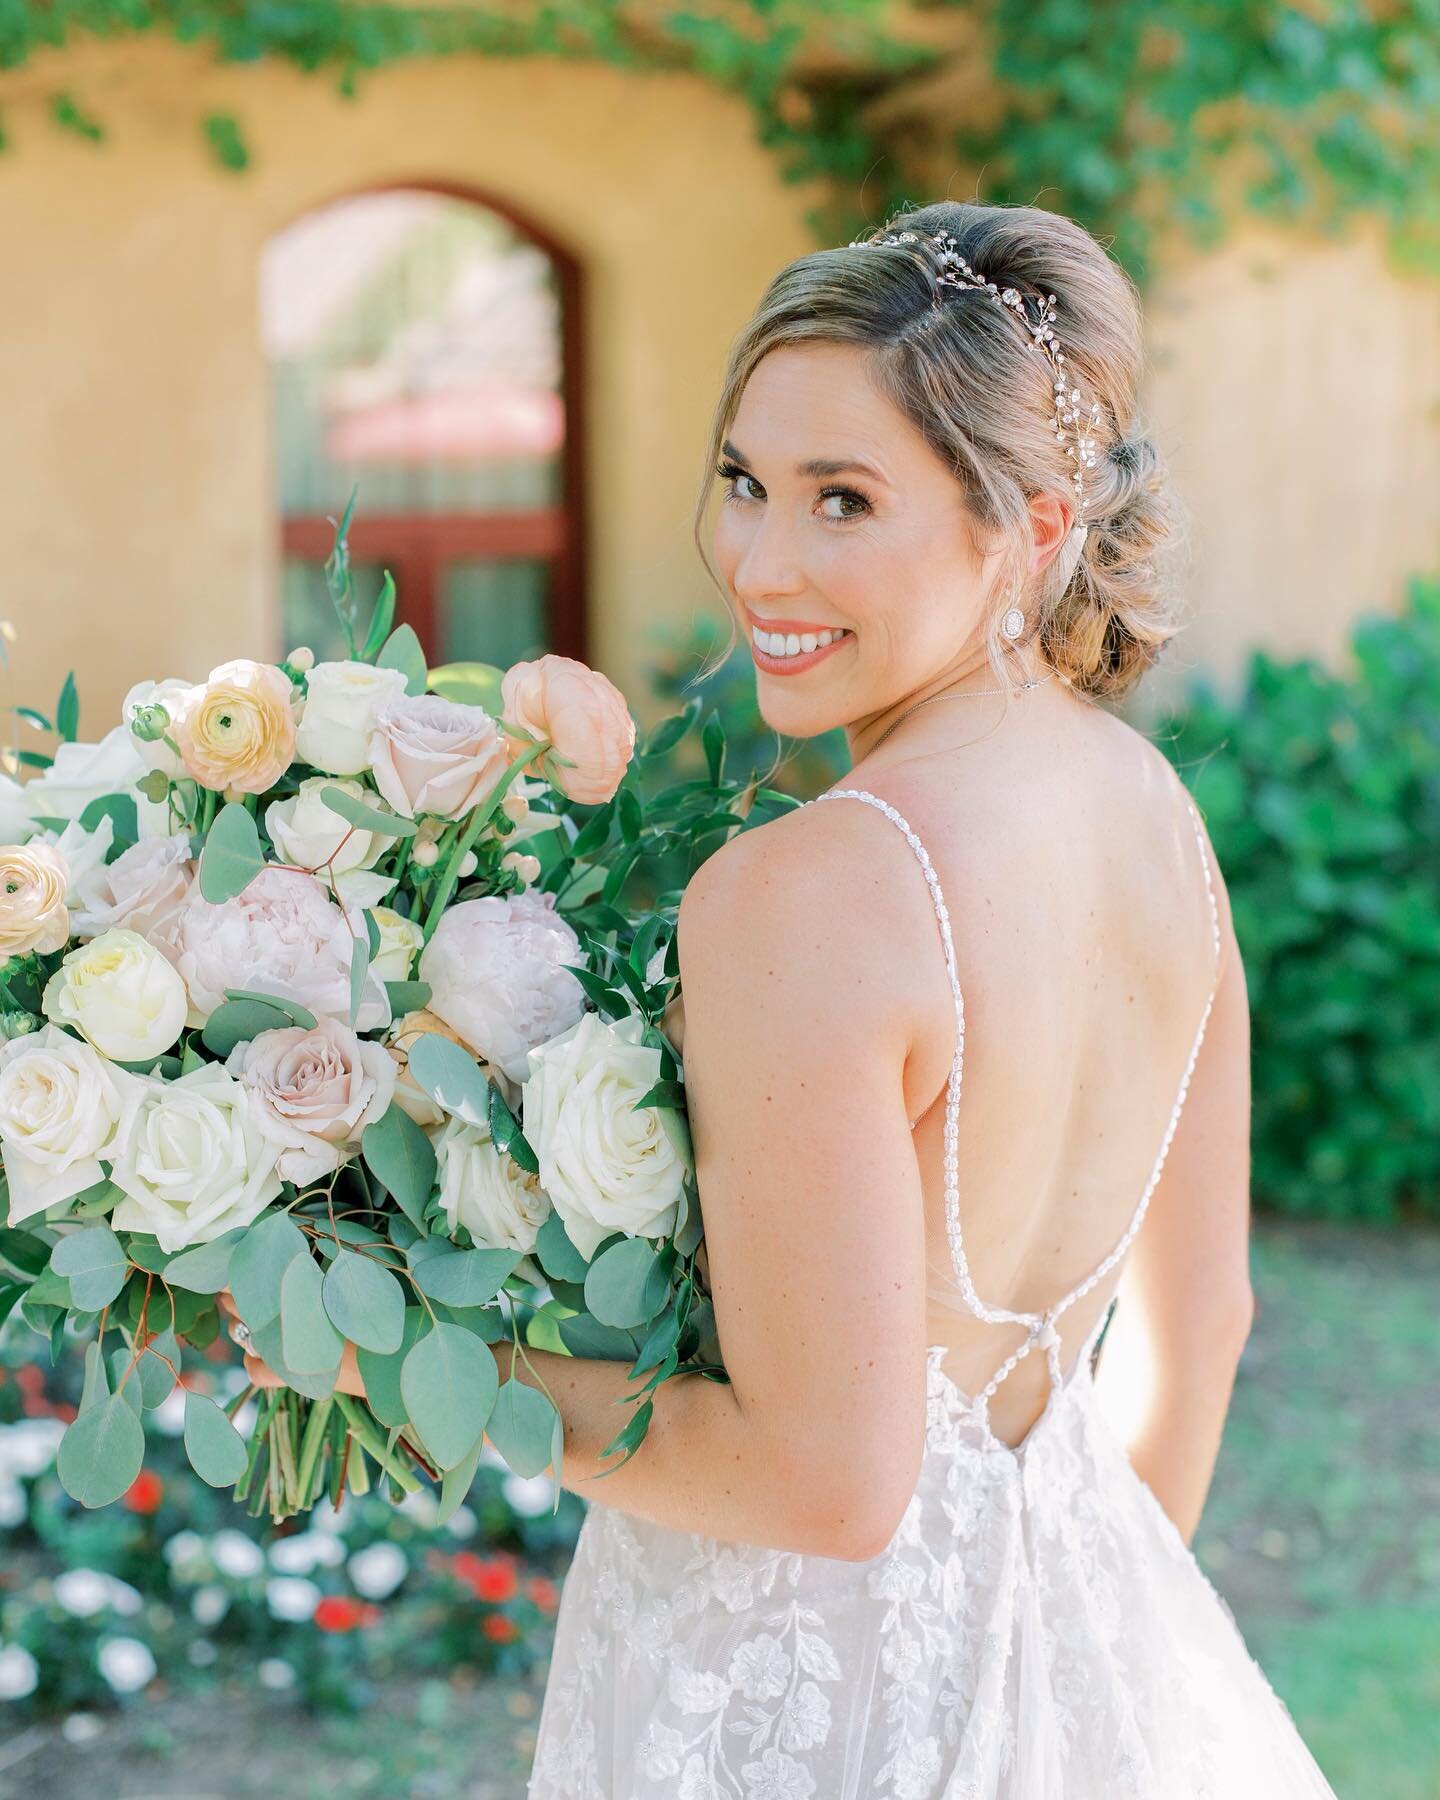 Picture perfect bridal is what we love to do! @aesthetic_rn_emmy did a gorgeous job glamming up @mackenzie_brynn_rosette 
📸 @yuliyajulphotography  #renohair #renomakeup #northerncaliforniamakeup #northerncaliforniabride #northerncaliforniawedding #l